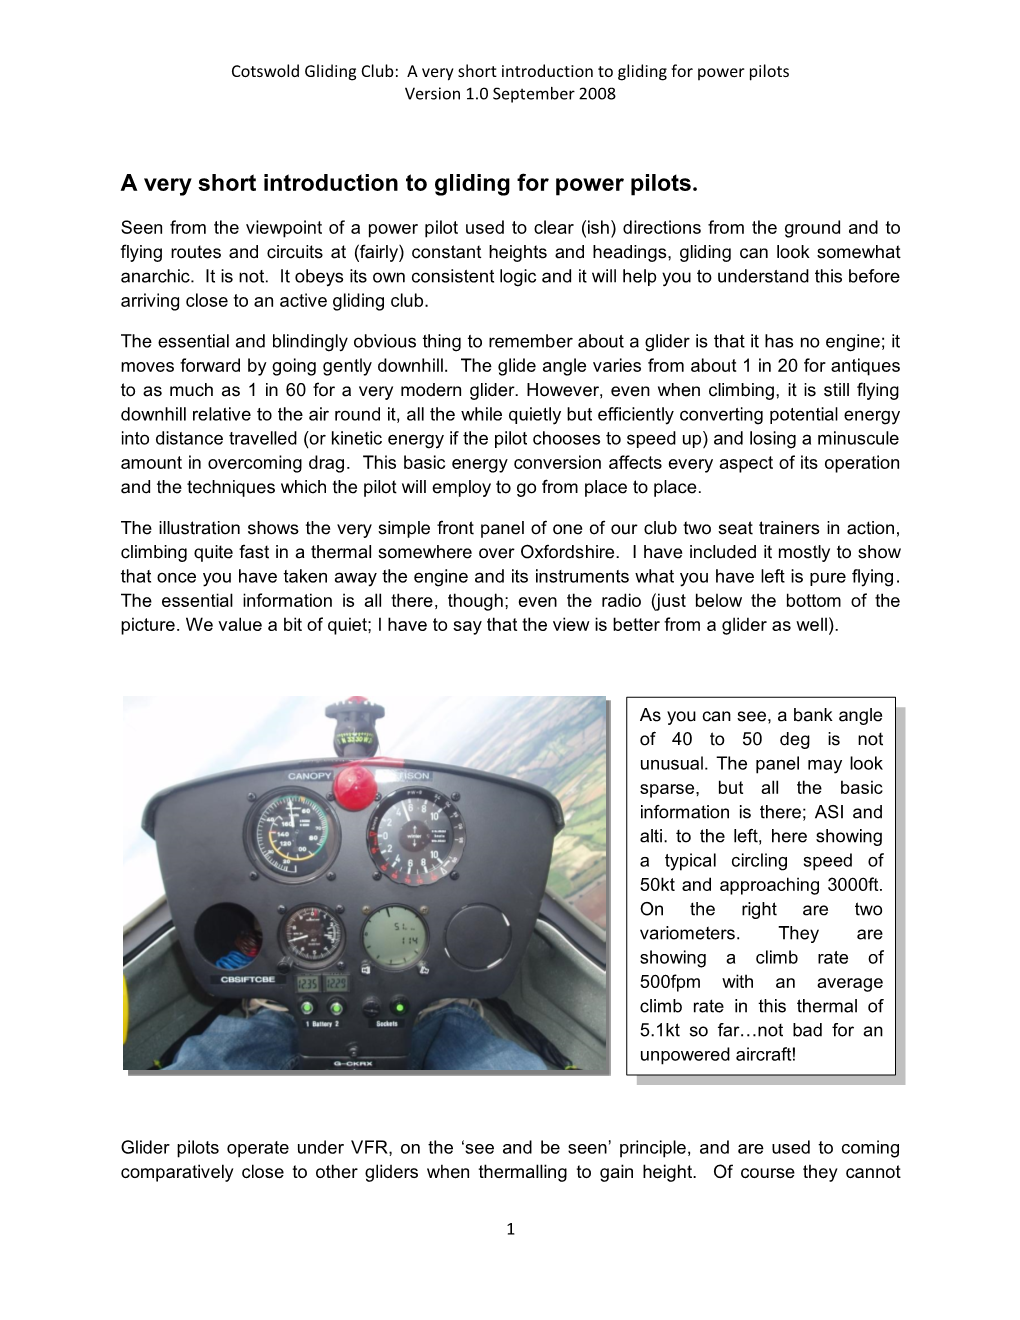 A Very Short Introduction to Gliding for Power Pilots